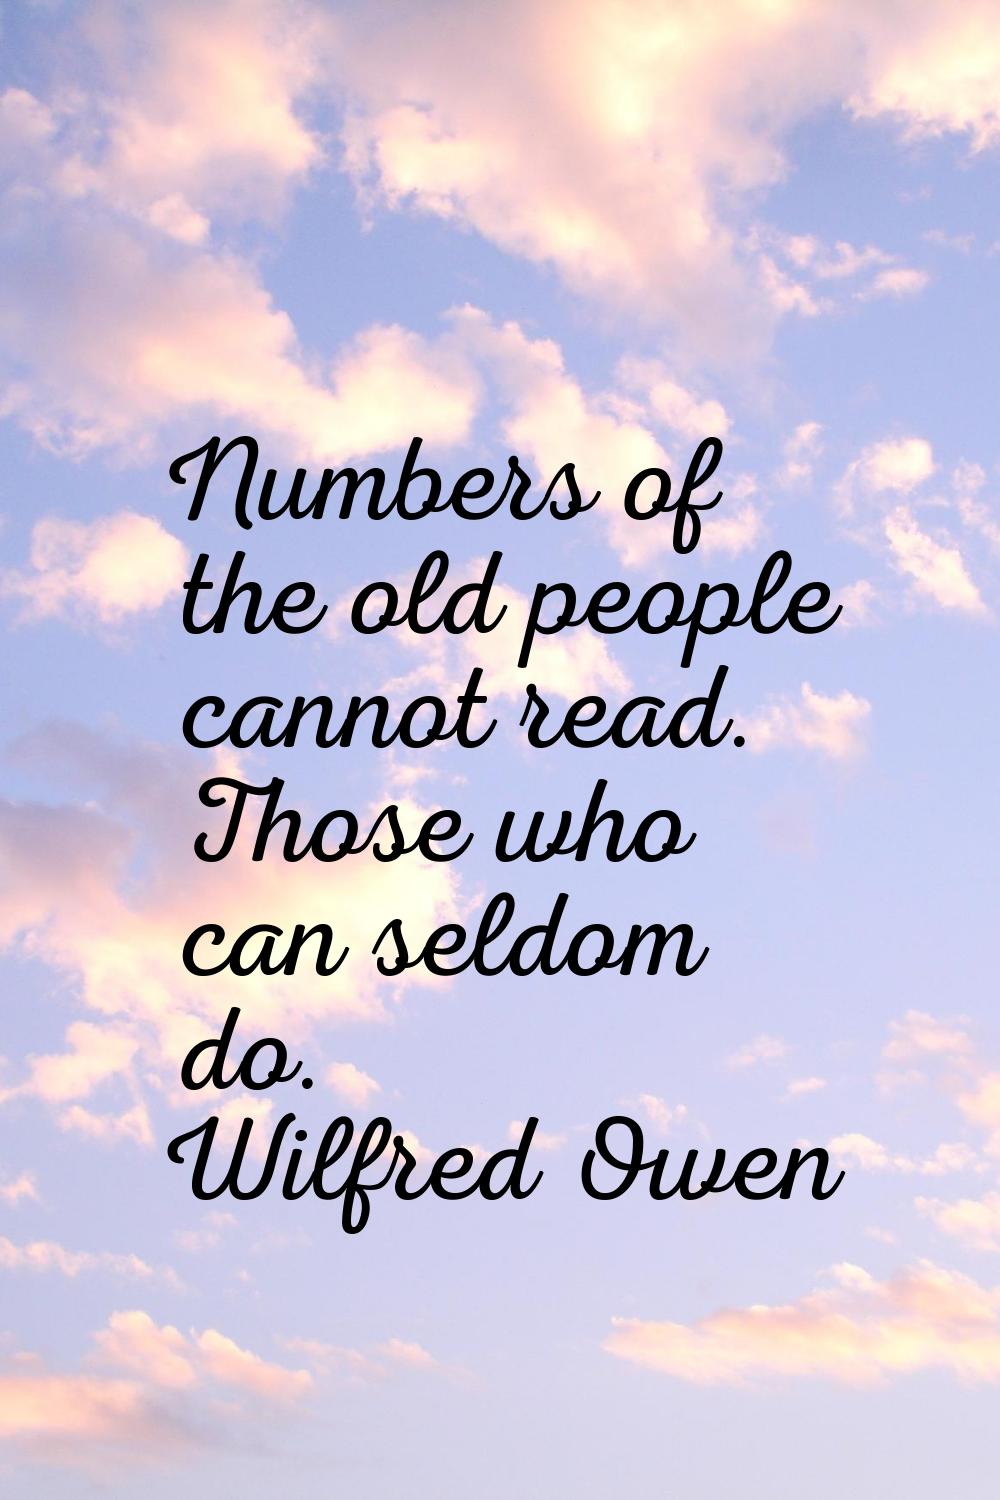 Numbers of the old people cannot read. Those who can seldom do.